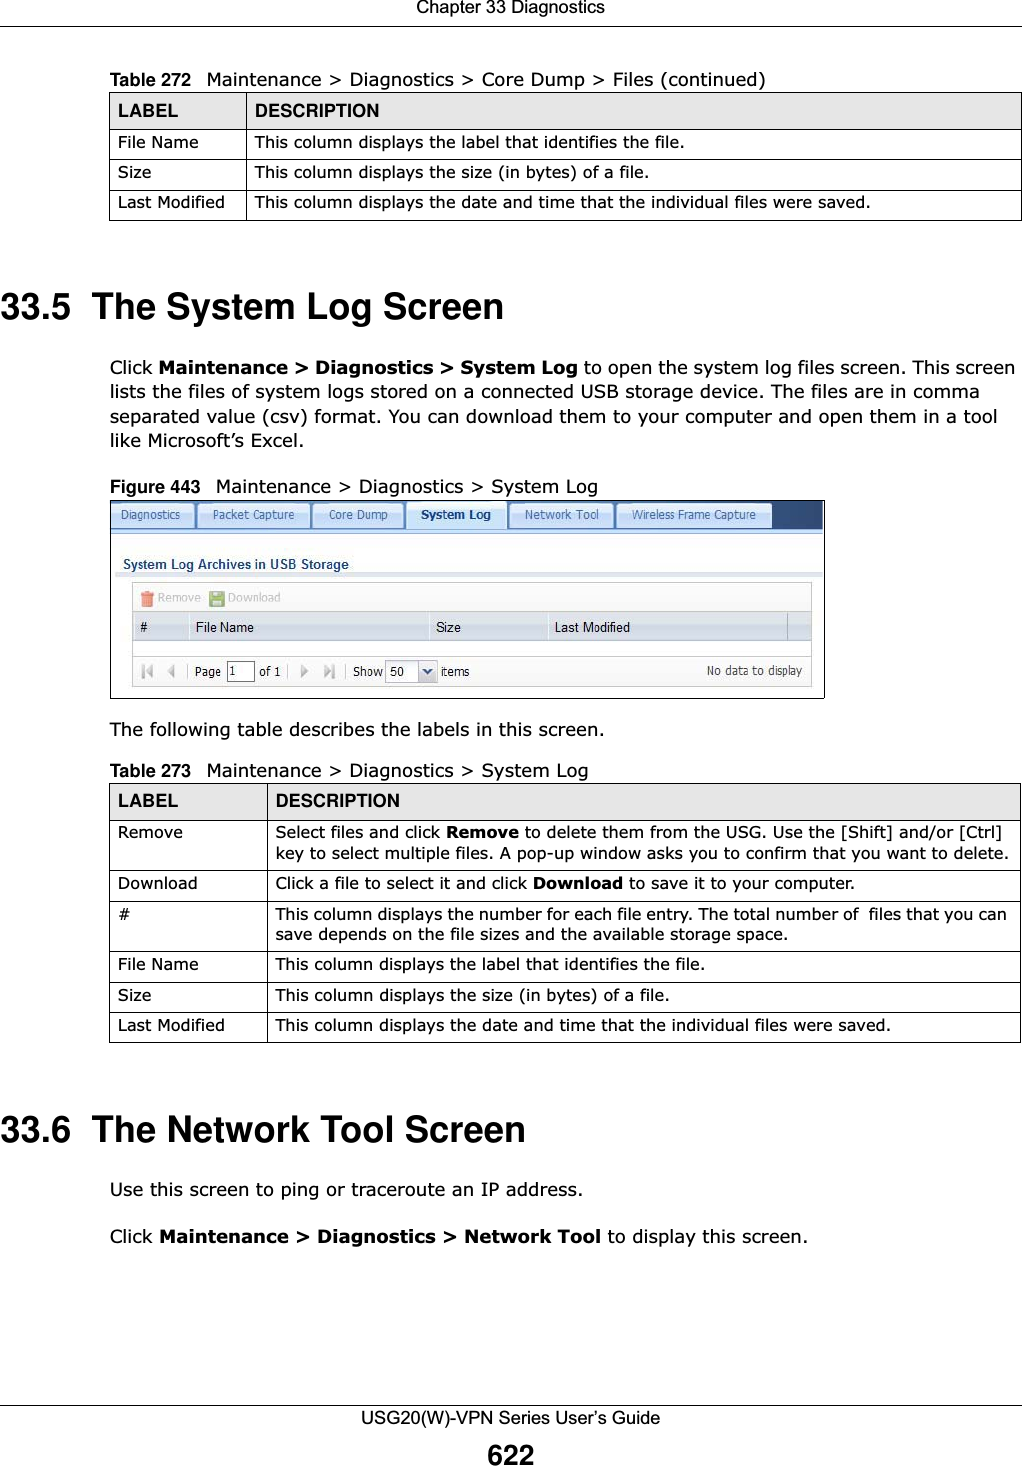 Chapter 33 DiagnosticsUSG20(W)-VPN Series User’s Guide62233.5  The System Log ScreenClick Maintenance &gt; Diagnostics &gt; System Log to open the system log files screen. This screen lists the files of system logs stored on a connected USB storage device. The files are in comma separated value (csv) format. You can download them to your computer and open them in a tool like Microsoft’s Excel.Figure 443   Maintenance &gt; Diagnostics &gt; System Log    The following table describes the labels in this screen.  33.6  The Network Tool ScreenUse this screen to ping or traceroute an IP address. Click Maintenance &gt; Diagnostics &gt; Network Tool to display this screen. File Name This column displays the label that identifies the file. Size This column displays the size (in bytes) of a file.Last Modified This column displays the date and time that the individual files were saved.Table 272   Maintenance &gt; Diagnostics &gt; Core Dump &gt; Files (continued)LABEL DESCRIPTIONTable 273   Maintenance &gt; Diagnostics &gt; System Log LABEL DESCRIPTIONRemove Select files and click Remove to delete them from the USG. Use the [Shift] and/or [Ctrl] key to select multiple files. A pop-up window asks you to confirm that you want to delete.Download Click a file to select it and click Download to save it to your computer.#This column displays the number for each file entry. The total number of  files that you can save depends on the file sizes and the available storage space.File Name This column displays the label that identifies the file. Size This column displays the size (in bytes) of a file.Last Modified This column displays the date and time that the individual files were saved.